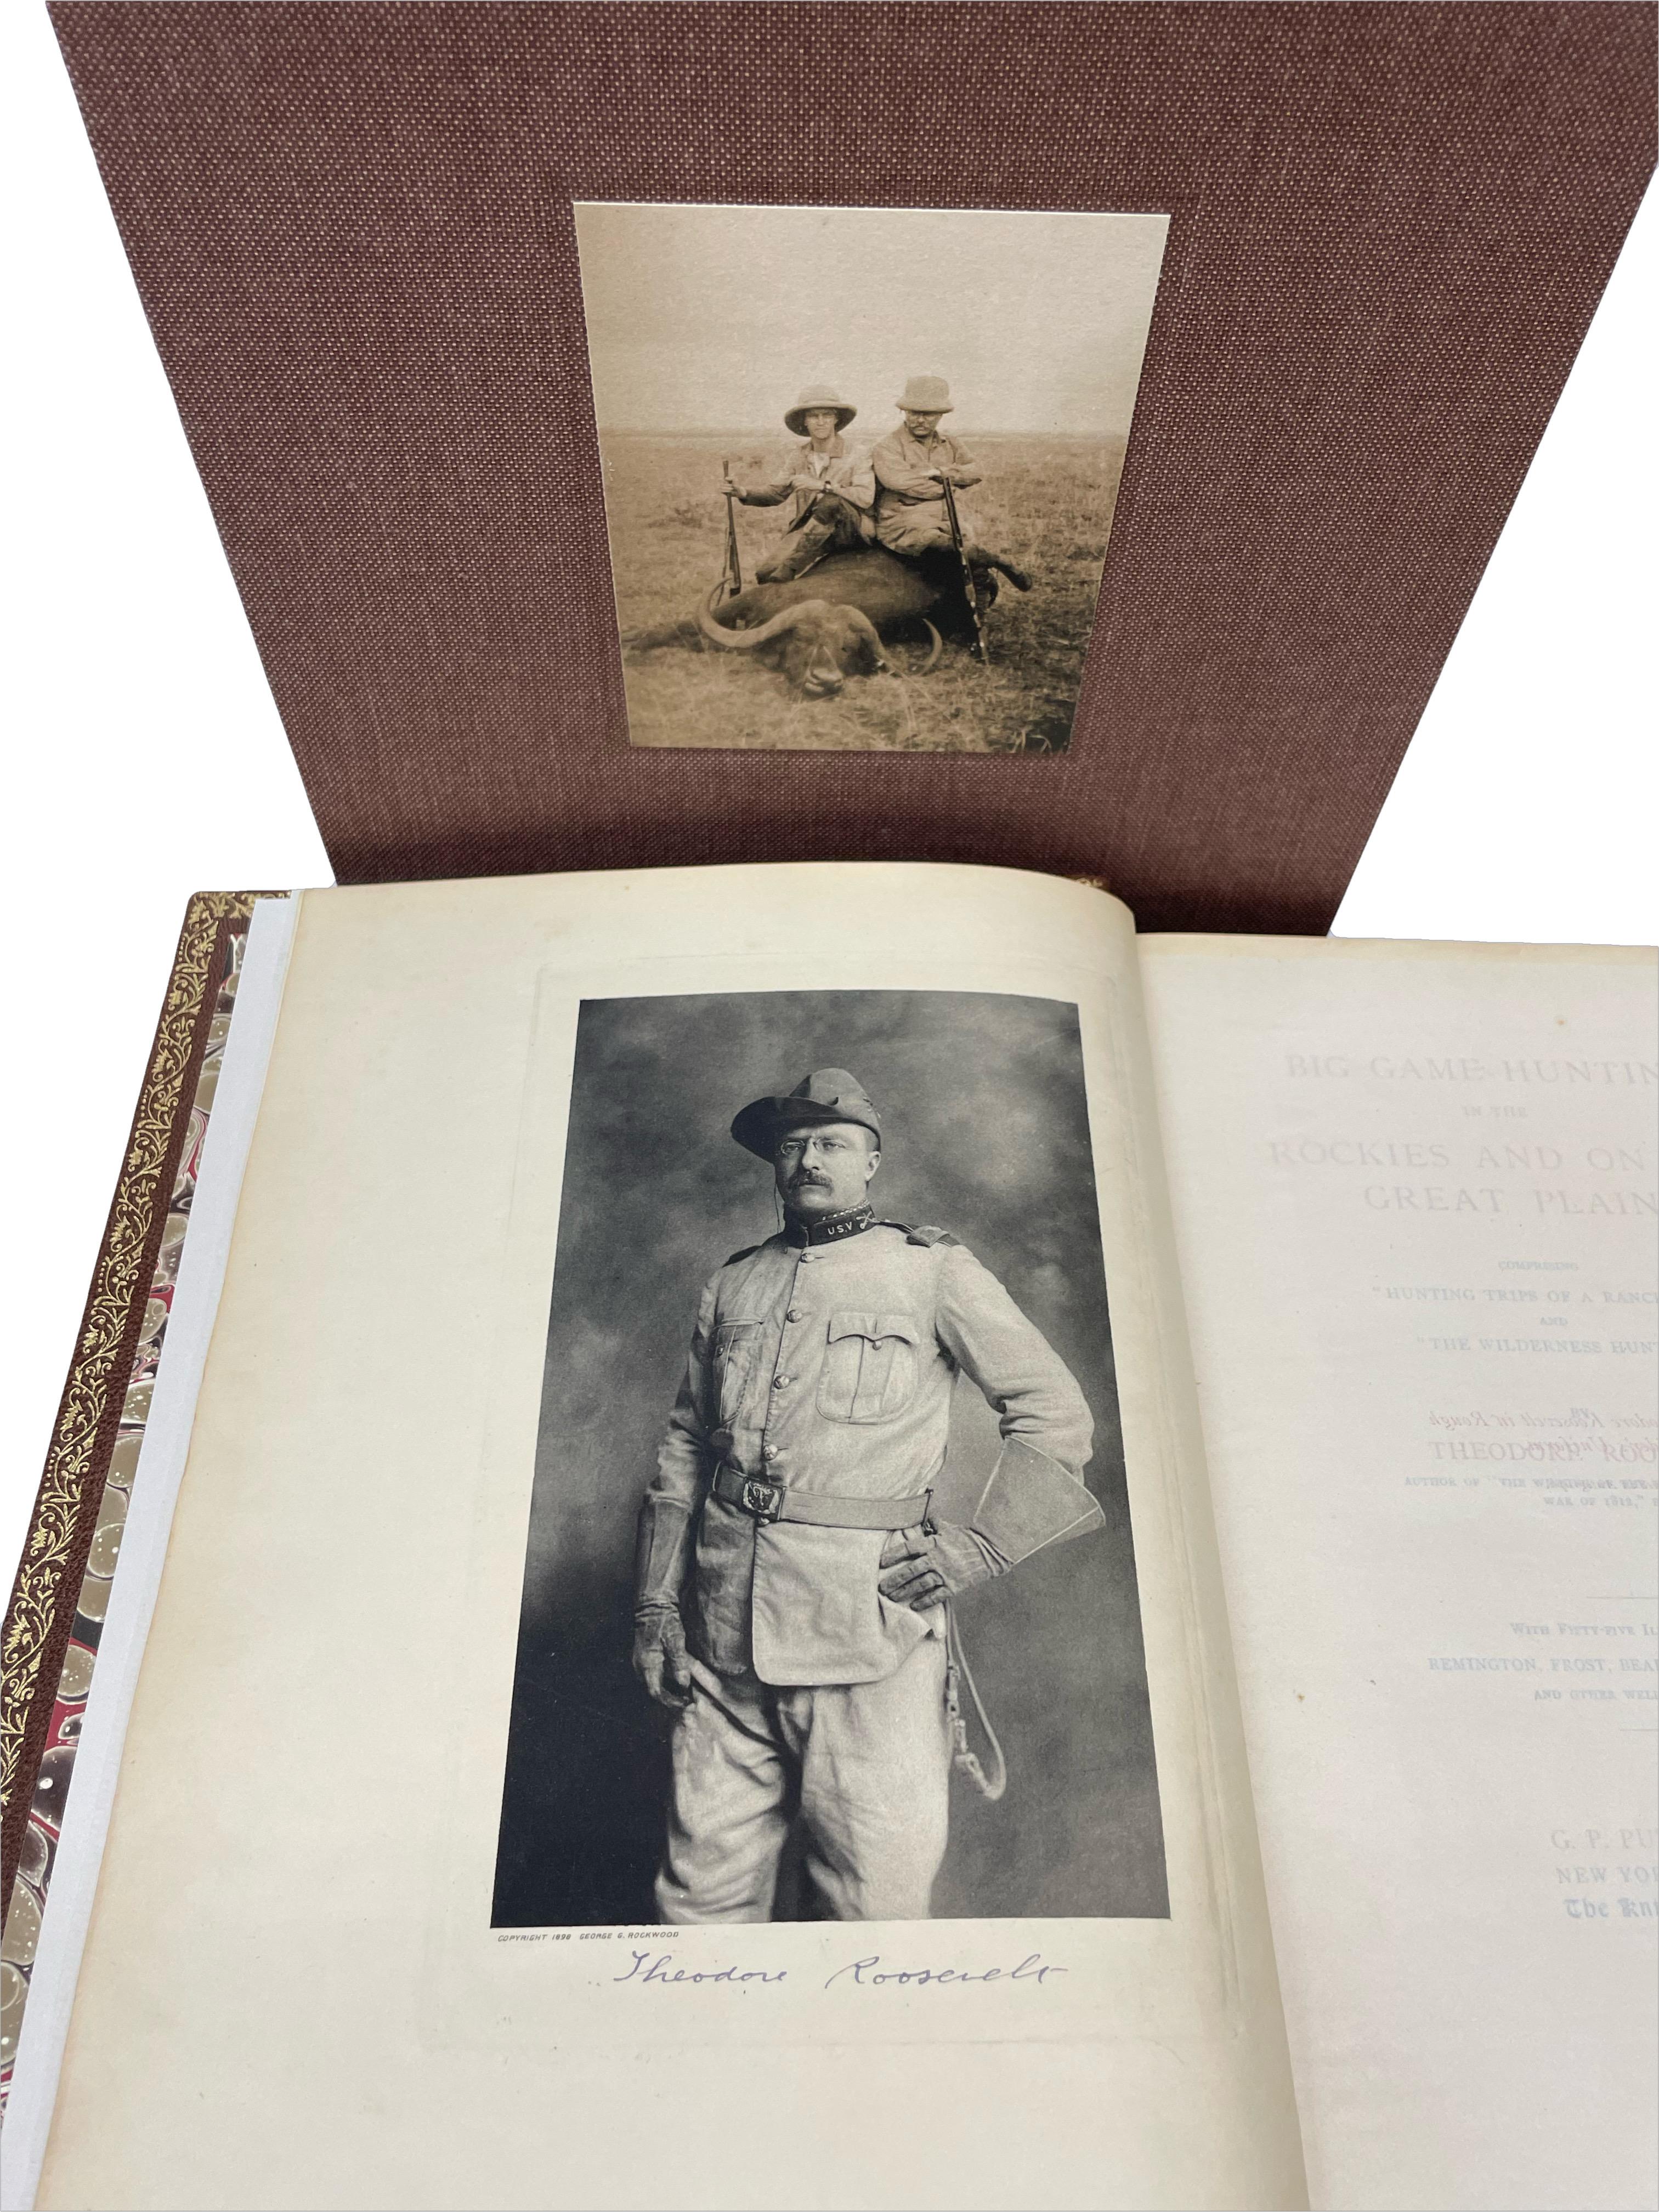 Roosevelt, Theodore. Big Game Hunting in the Rockies and on the Great Plains. New York: G. P. Putnam’s Sons, 1899. Signed by Theodore Roosevelt. Limited First Edition, hand-numbered 606 / 1000. Fifty-five Illustrations. Rebound in full leather with